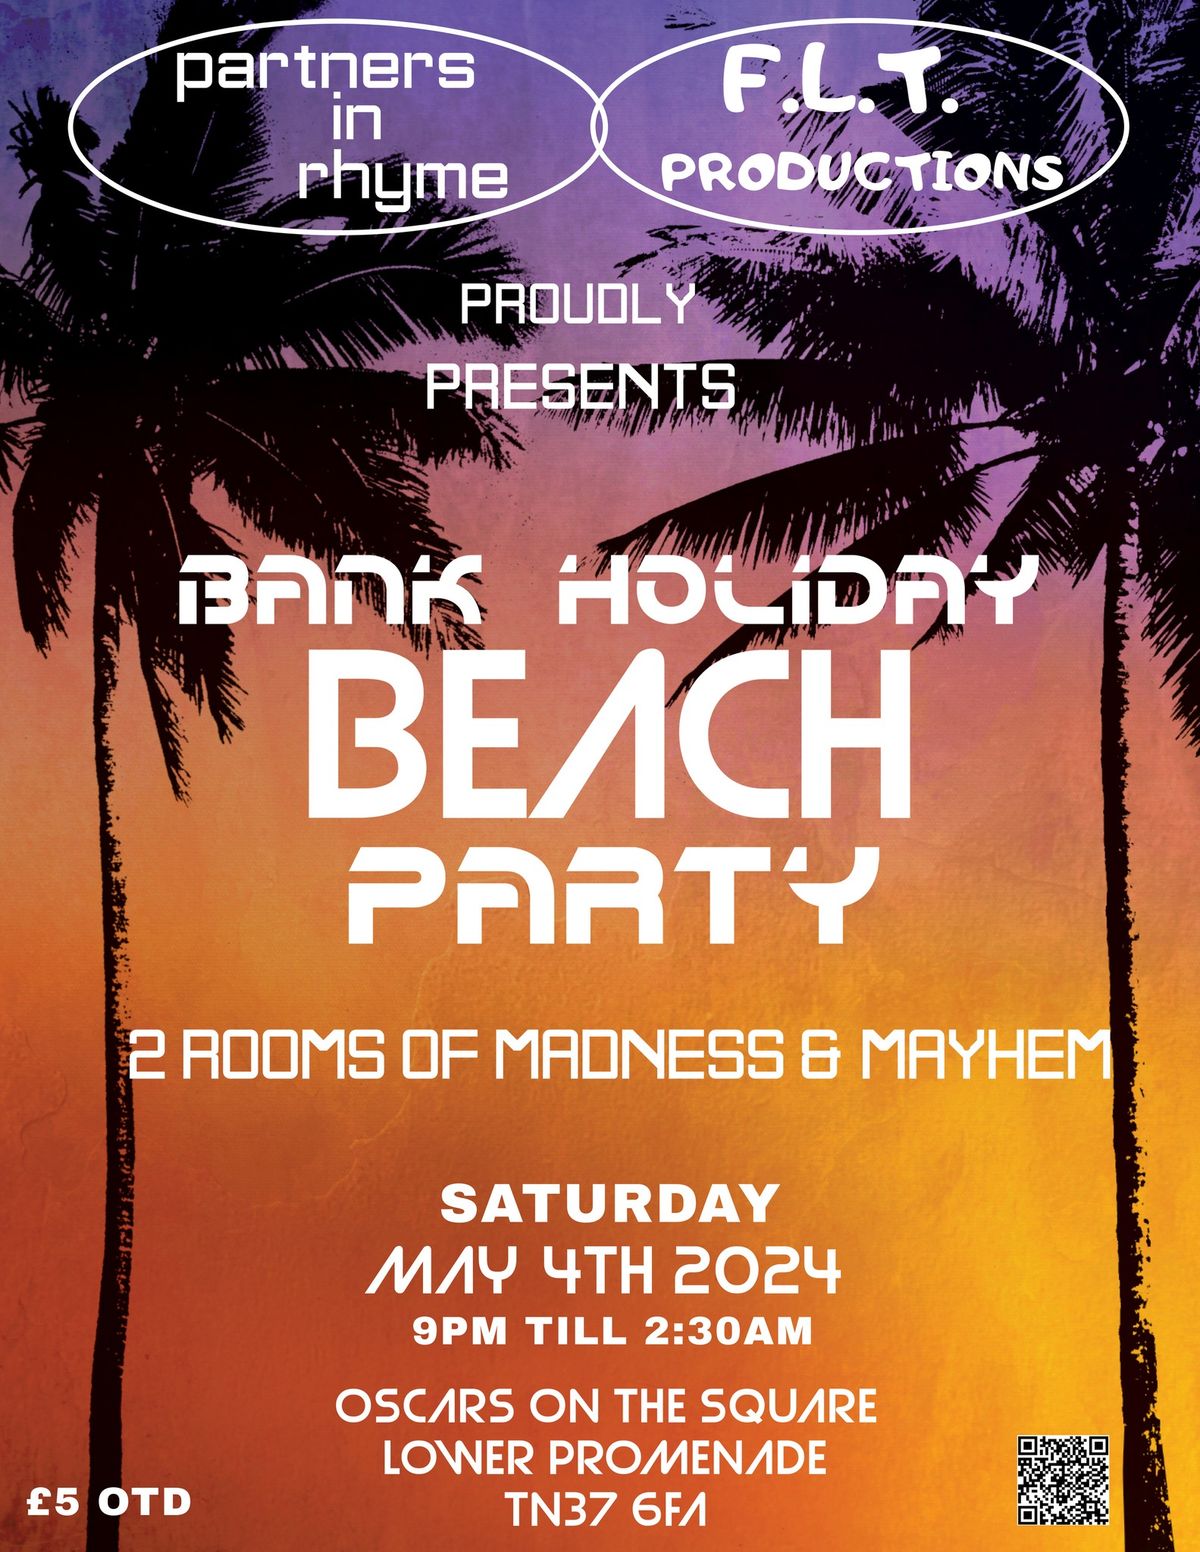 Bank Holiday Beach Party